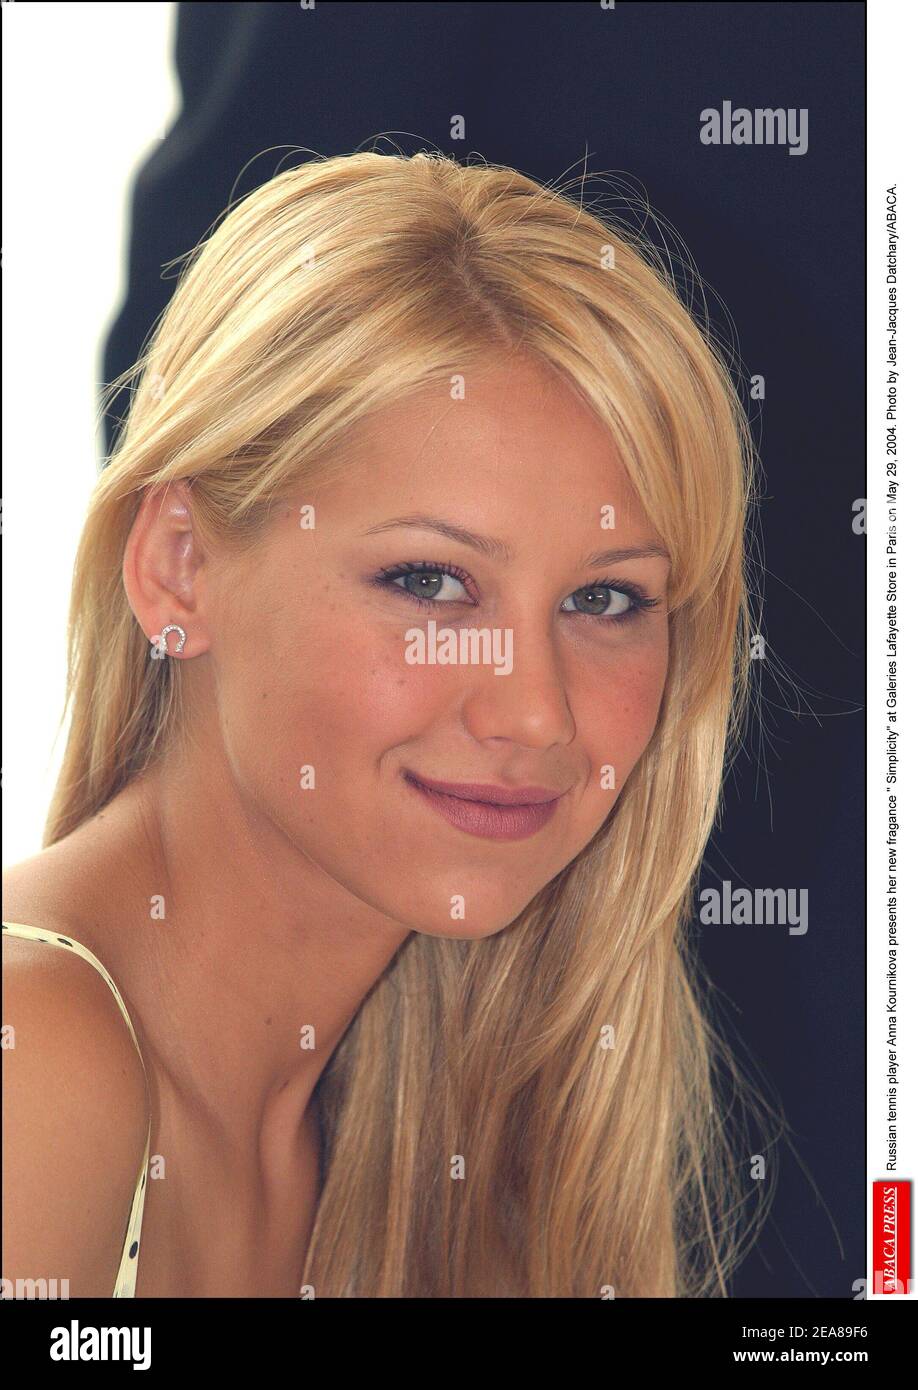 Russian tennis player Anna Kournikova presents her new fragance Simplicity at Galeries Lafayette Store in Paris on May 29, 2004. Photo by Jean-Jacques Datchary/ABACA. Stock Photo